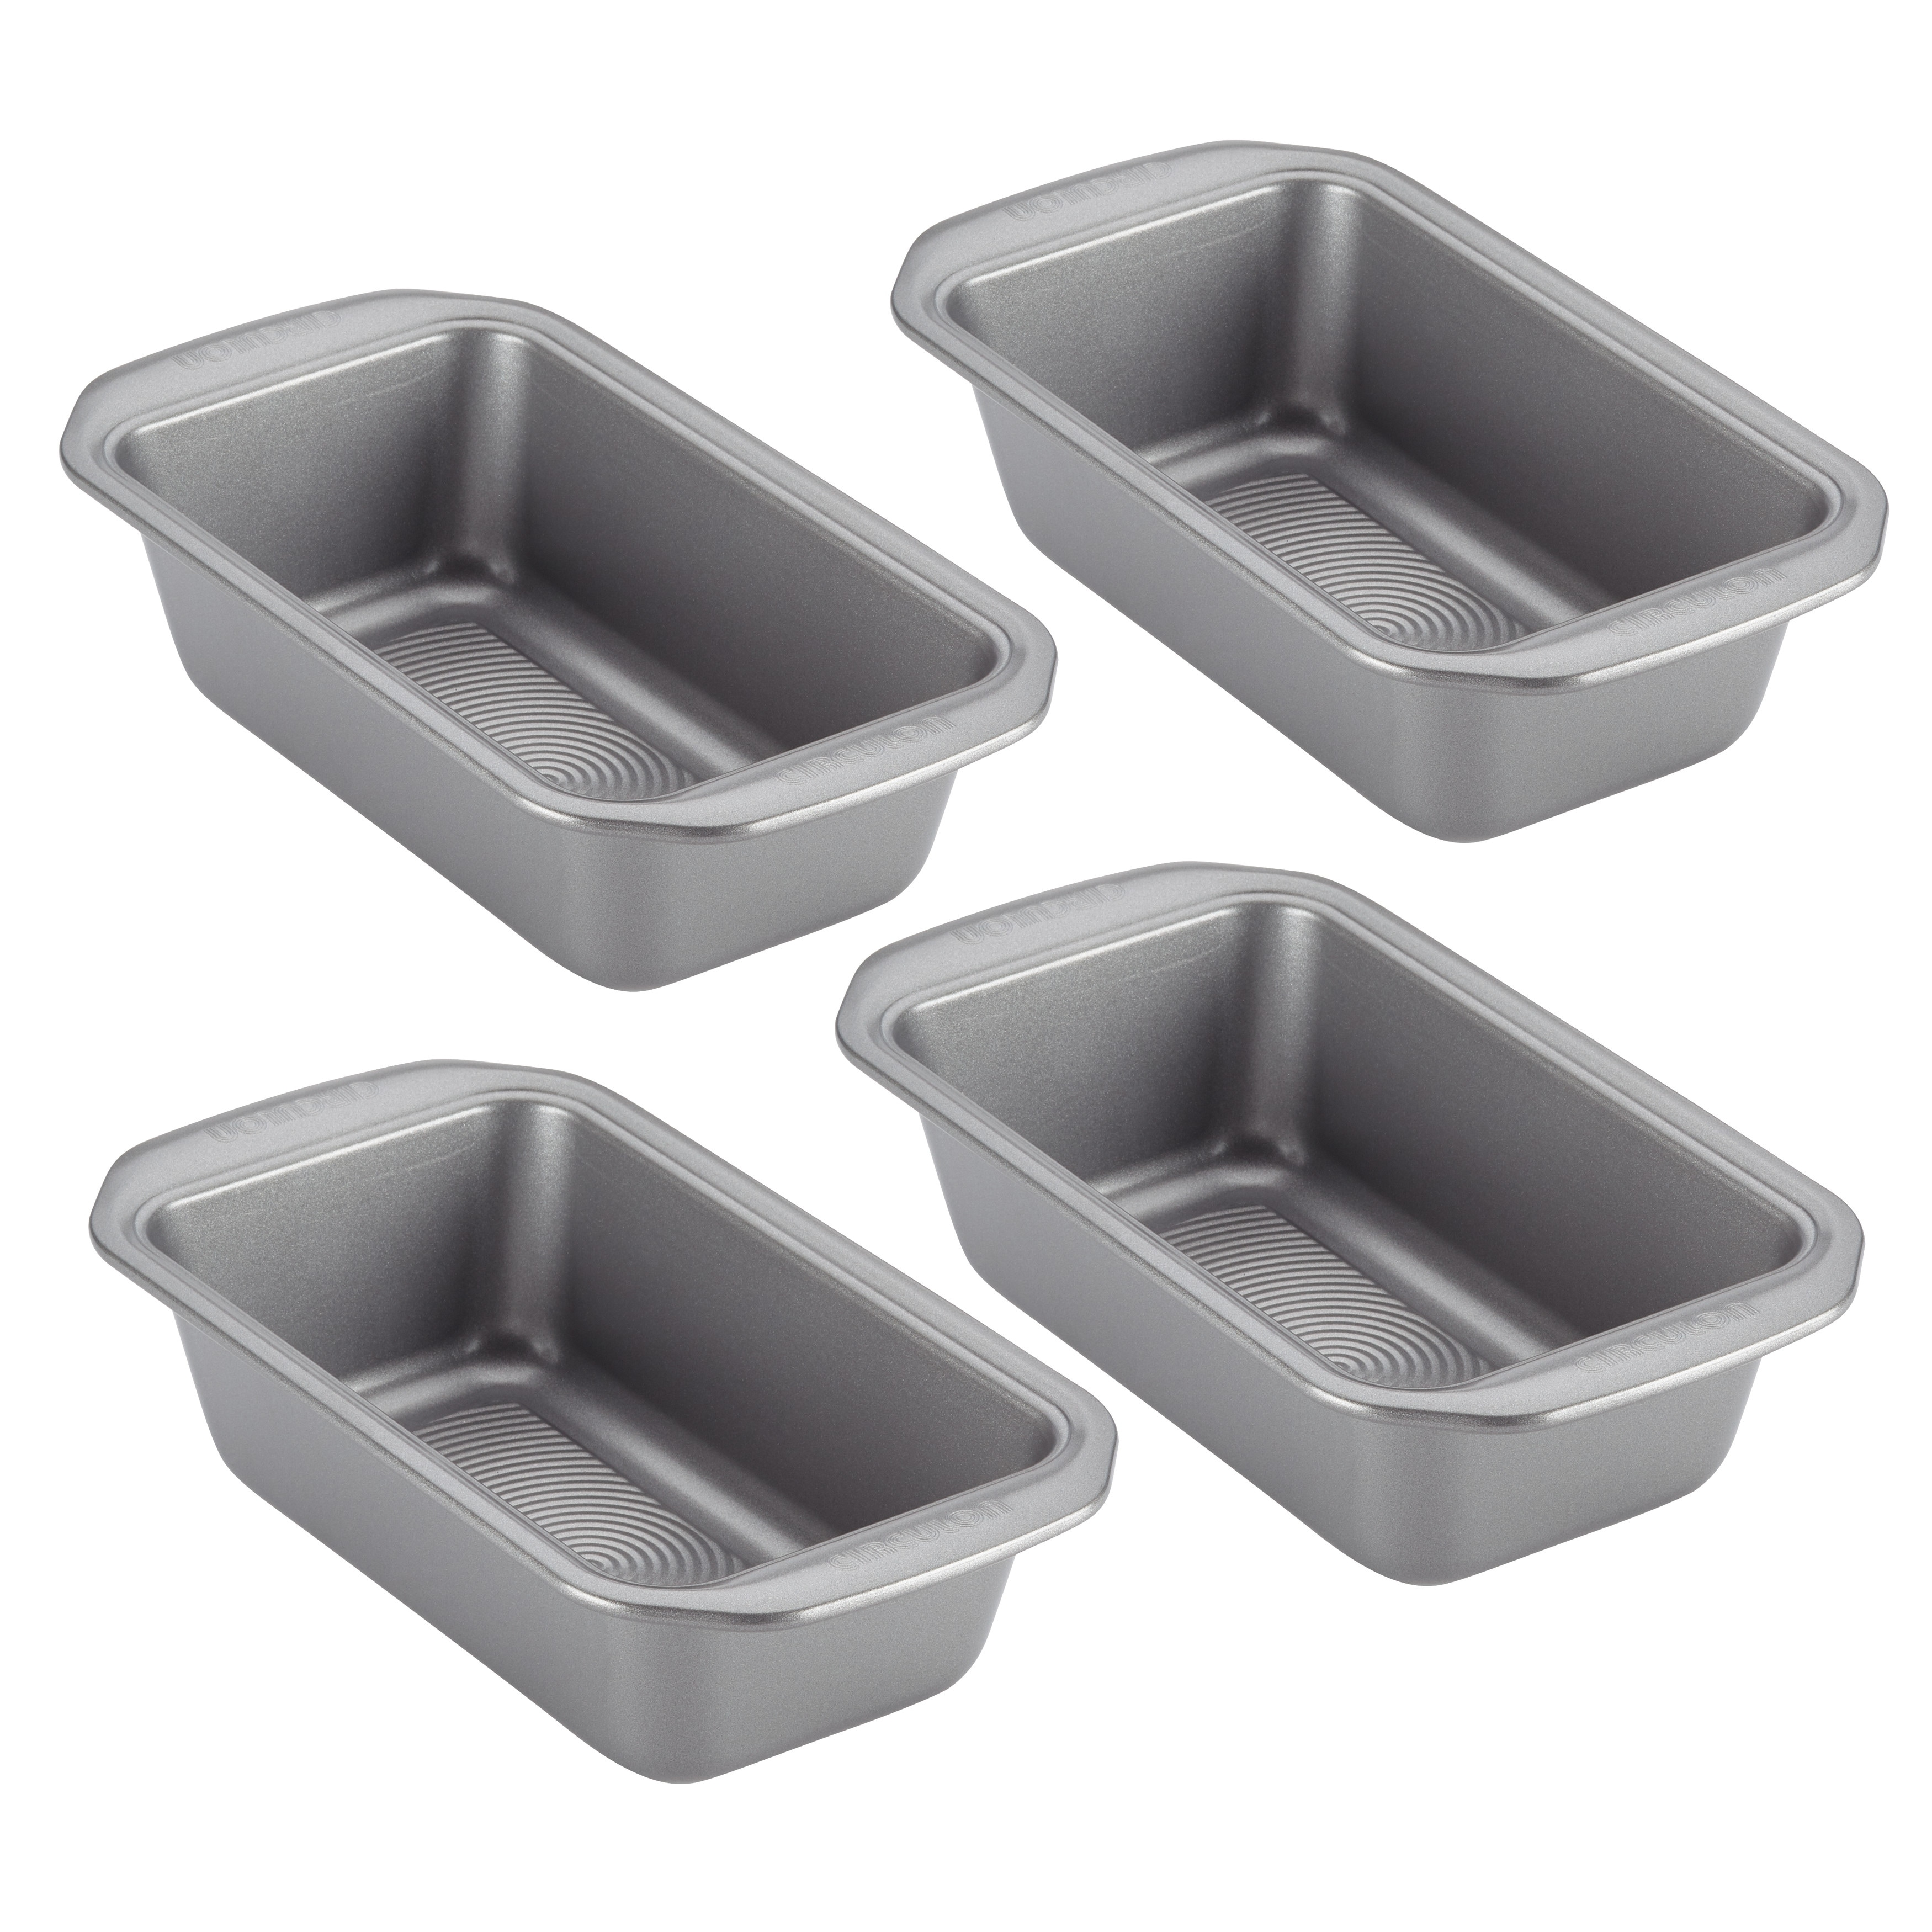 https://ak1.ostkcdn.com/images/products/is/images/direct/caf13e9a67326fc337c6725d8087392530d6c313/Circulon-Nonstick-Bakeware-Loaf-Pan%2C-9-Inch-x-5-Inch%2C-Gray.jpg